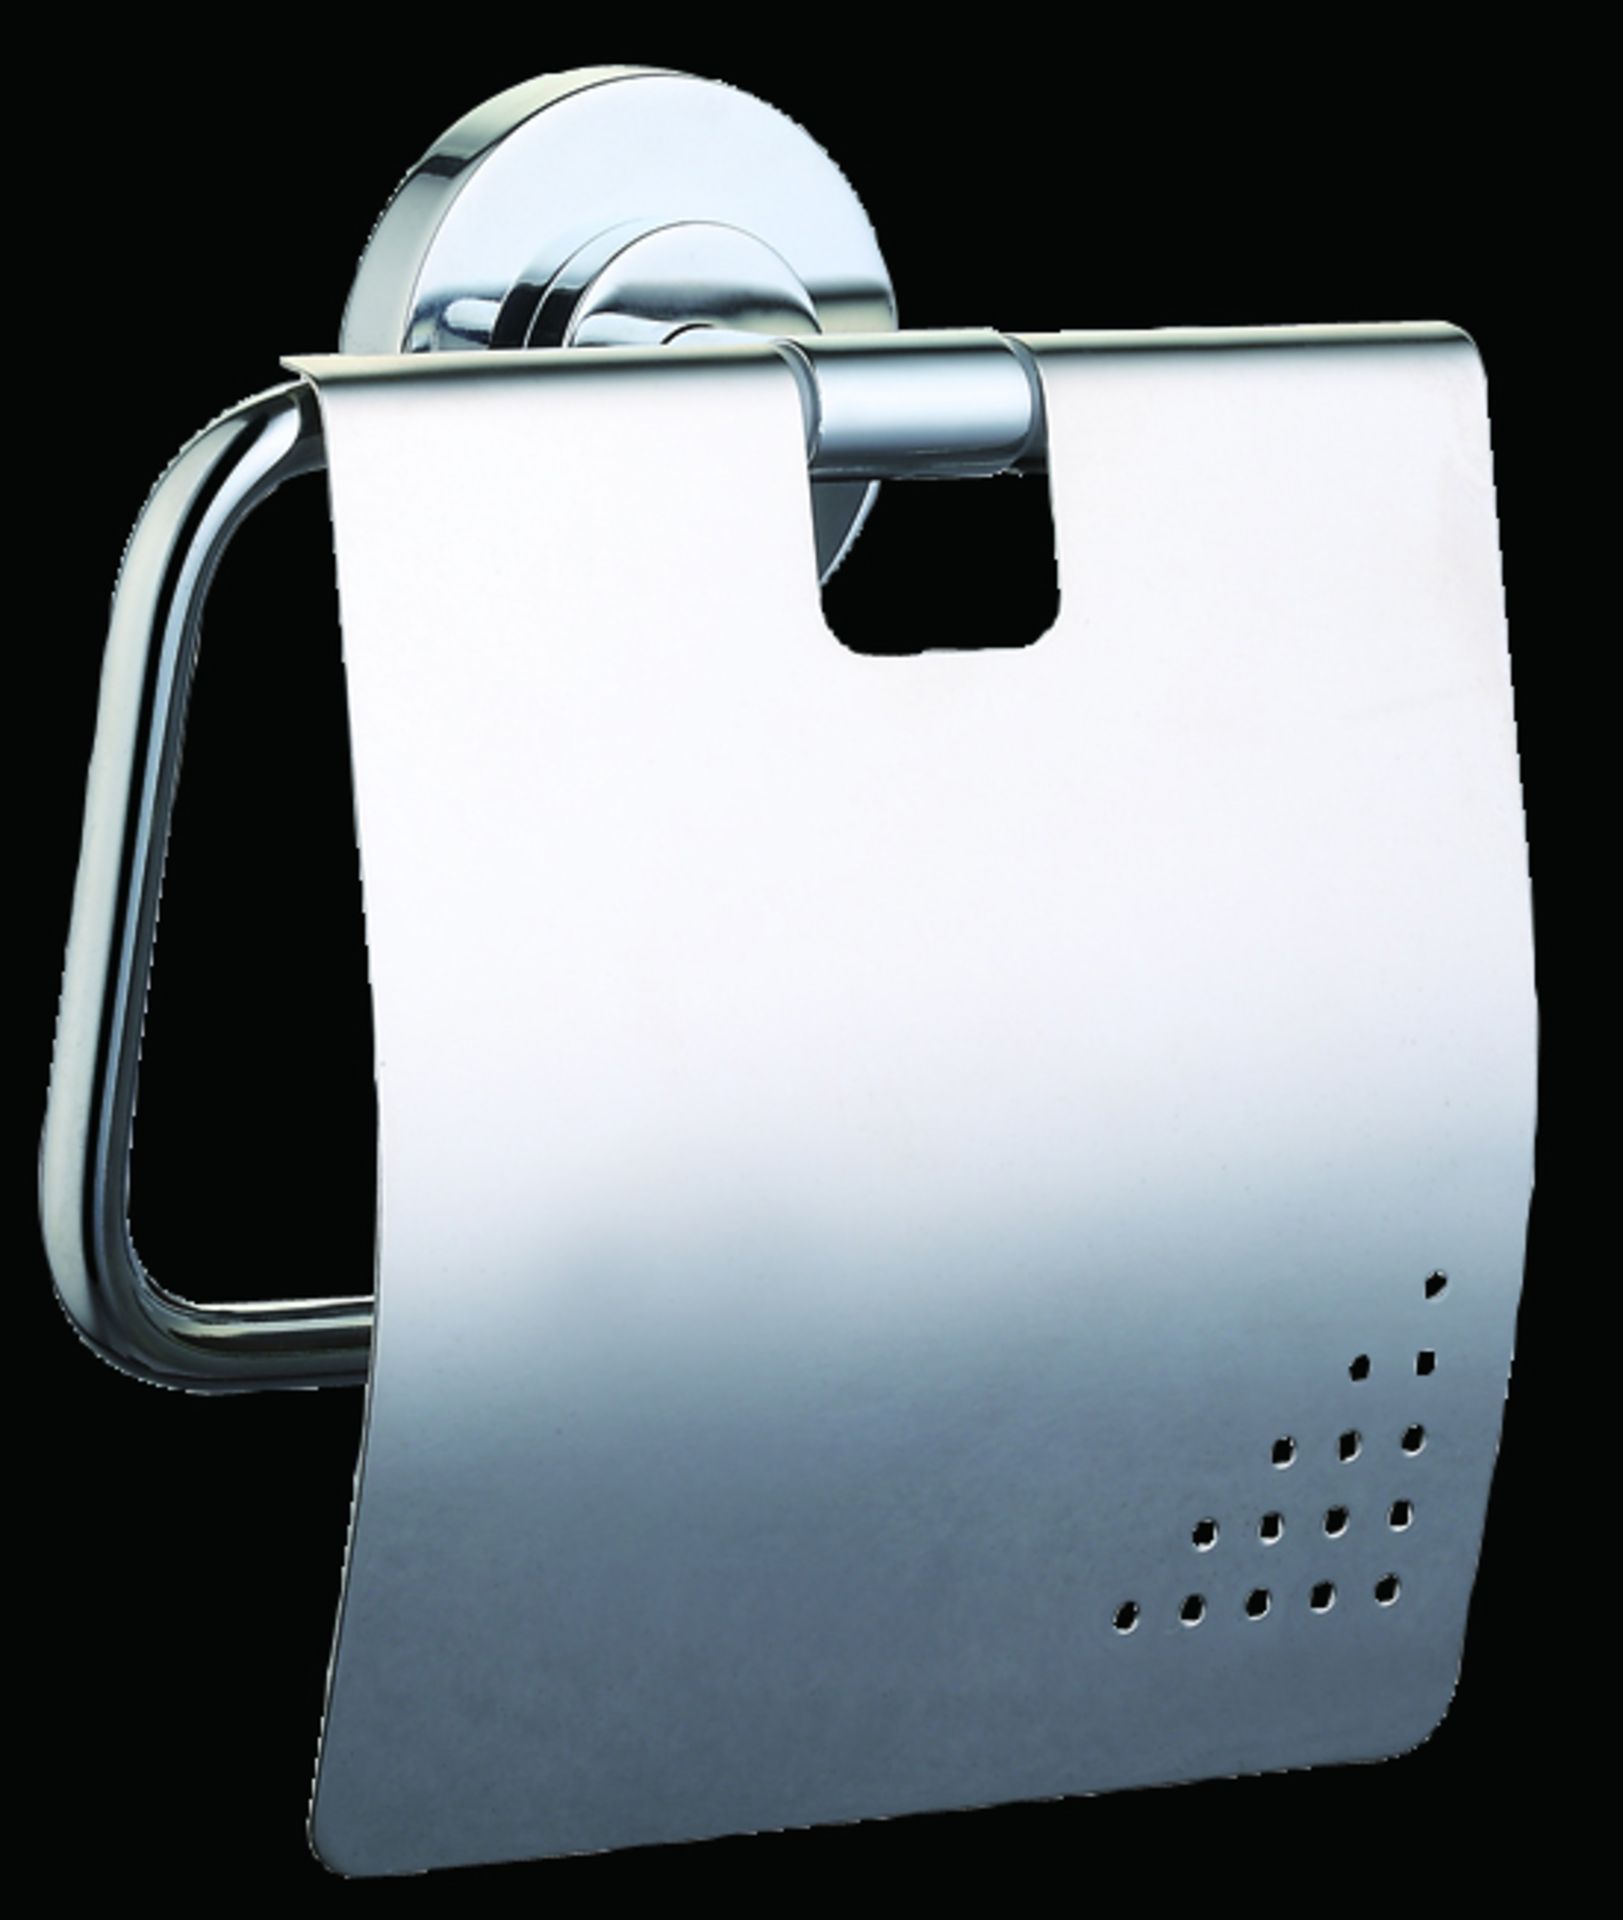 1 x Vogue Series 5 Six Piece Bathroom Accessory Set - Includes WC Roll Holder, Soap Dispenser, - Image 8 of 8